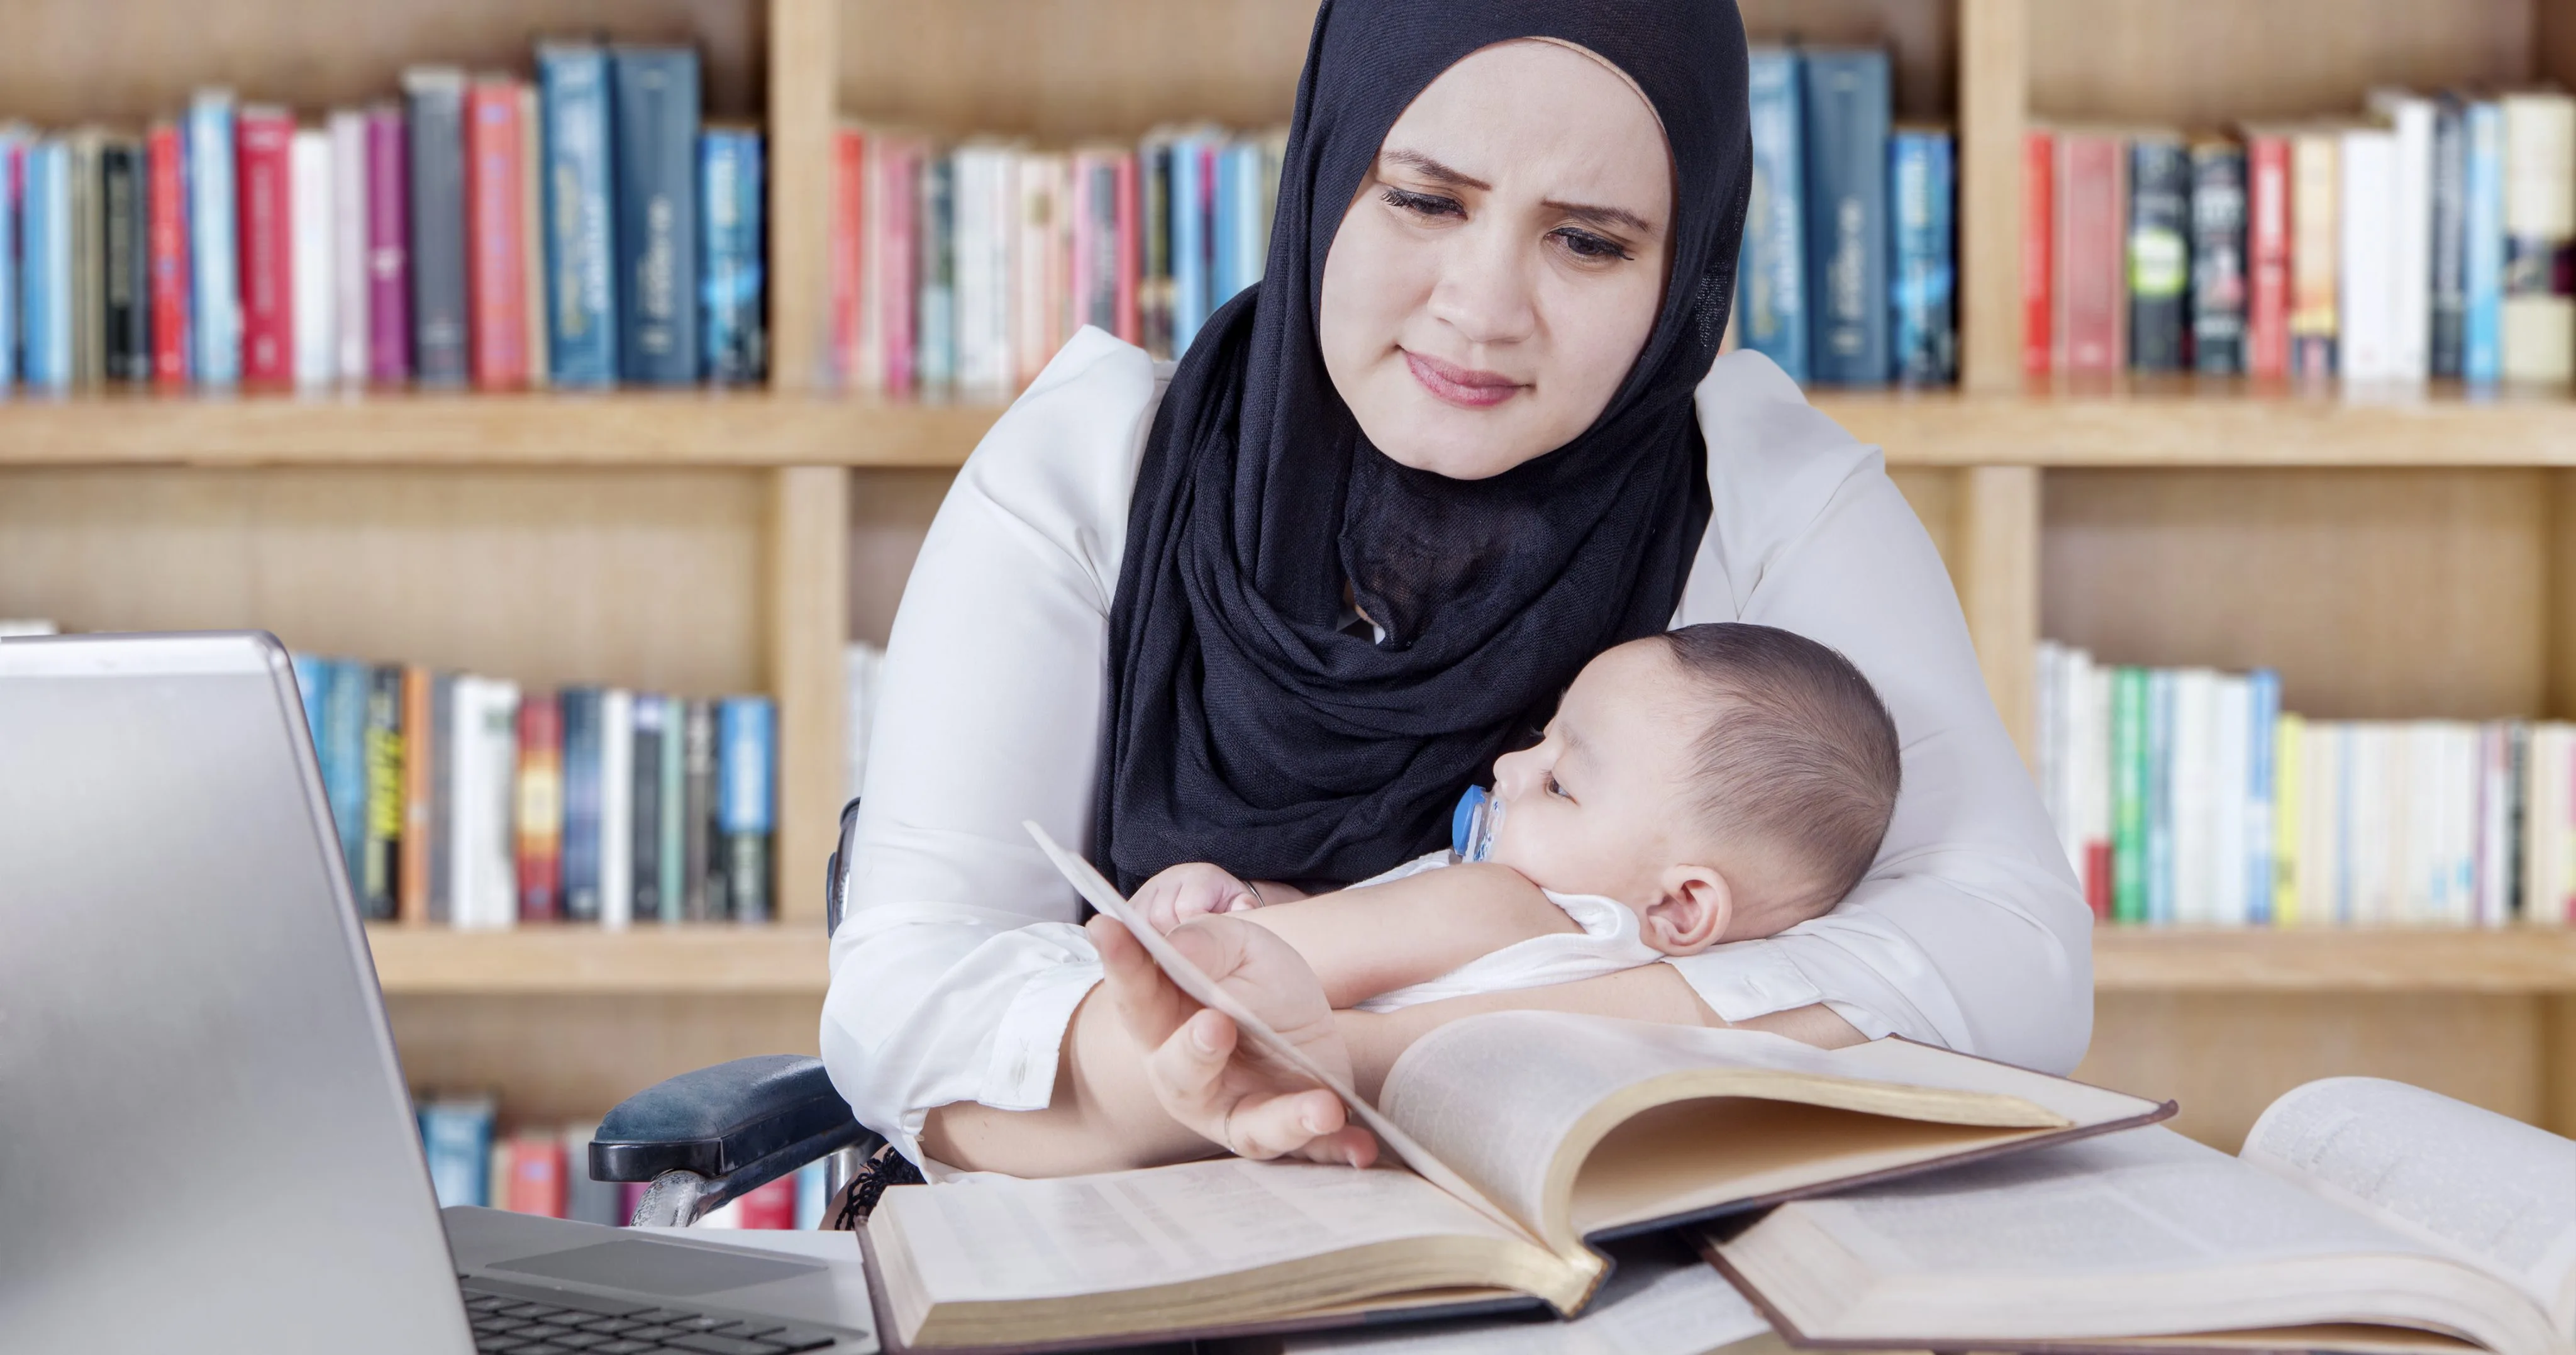 Woman-with-baby-reading-books